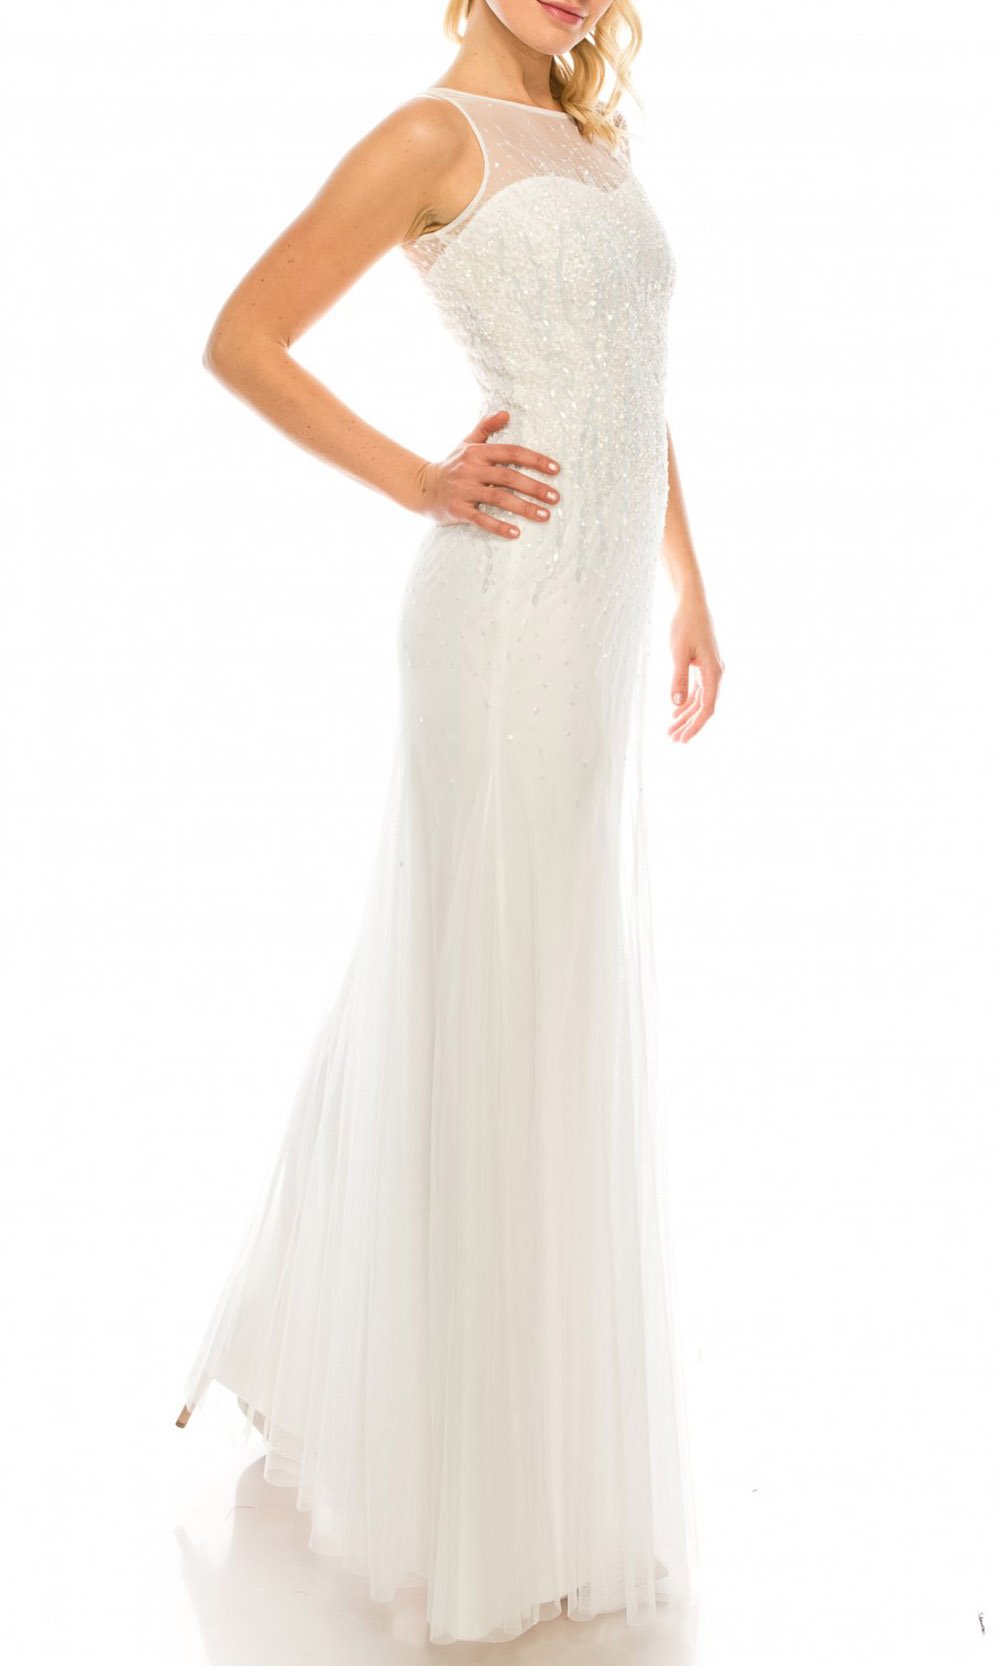 Adrianna Papell - 91892190 Beaded Illusion Neck Dress In White